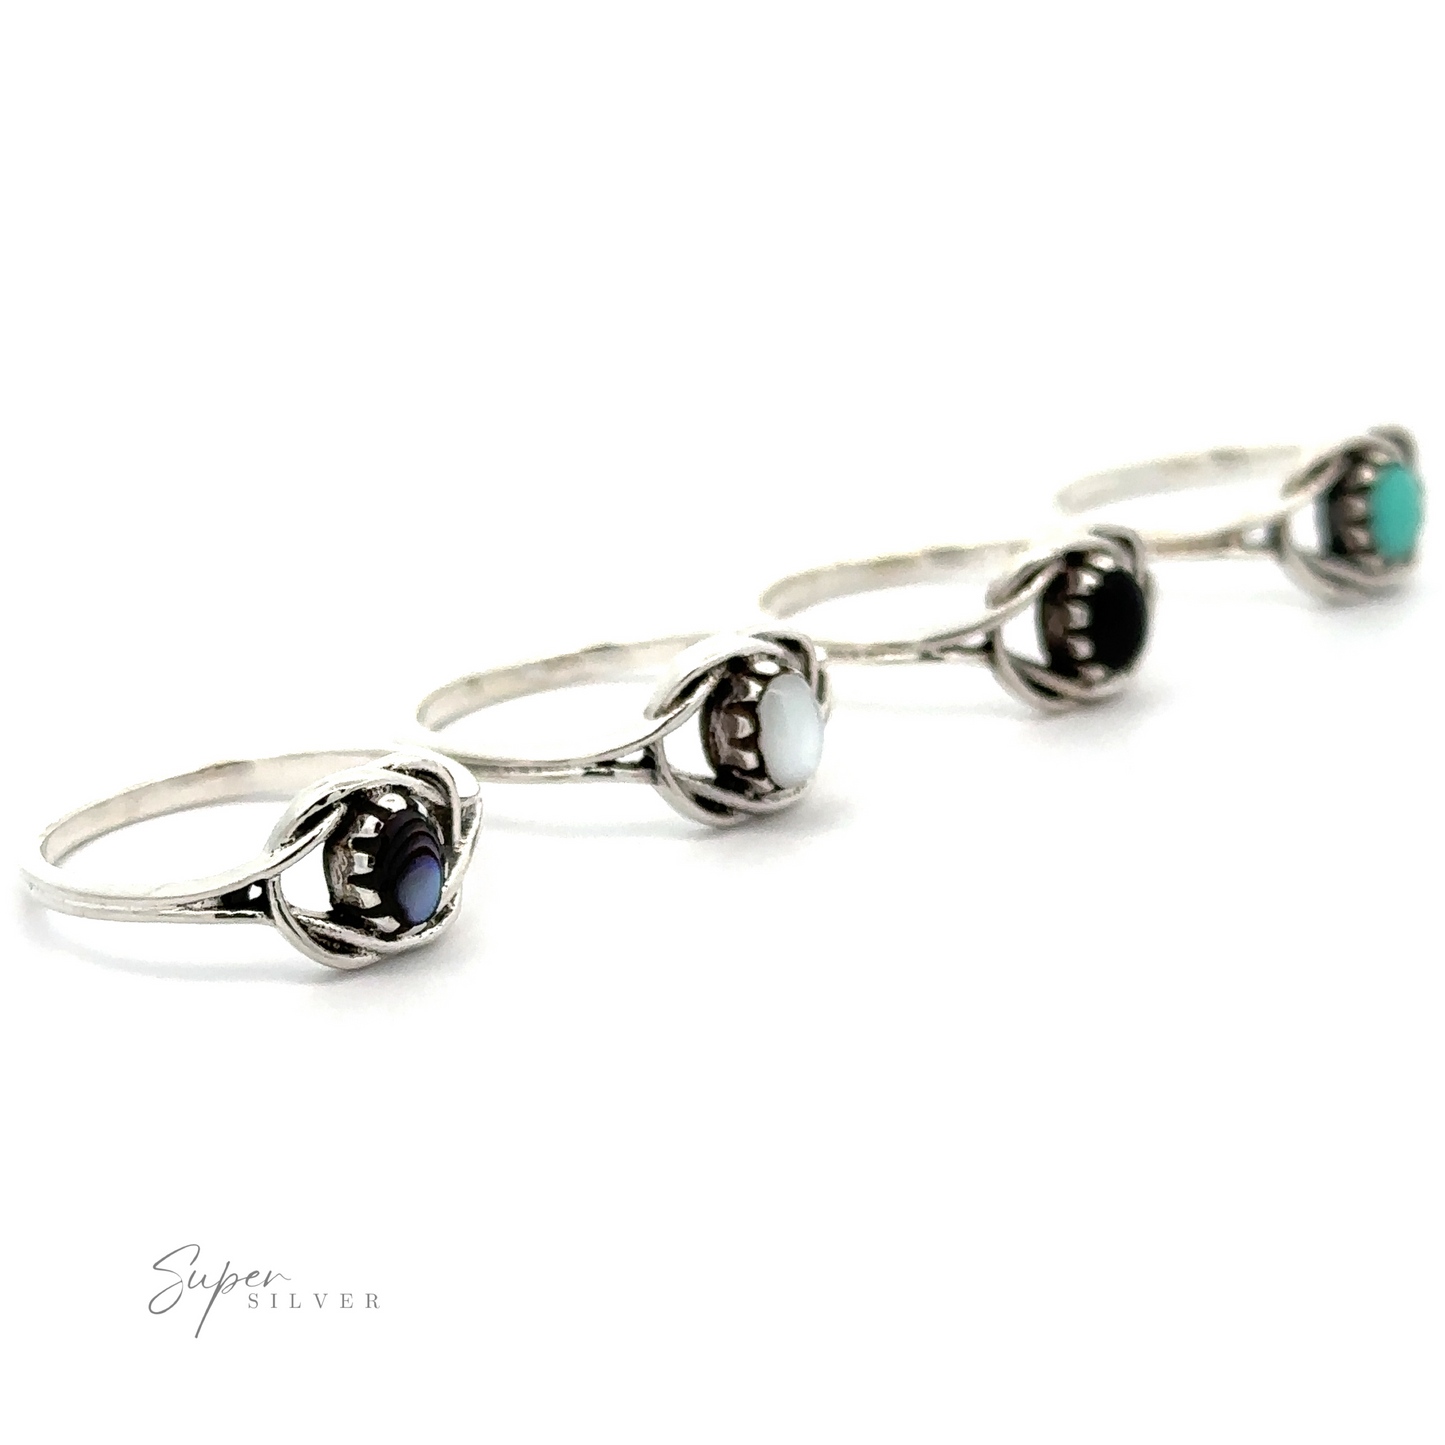 A row of Delicate Knot Rings with Oval Stones, giving off a boho vibe.